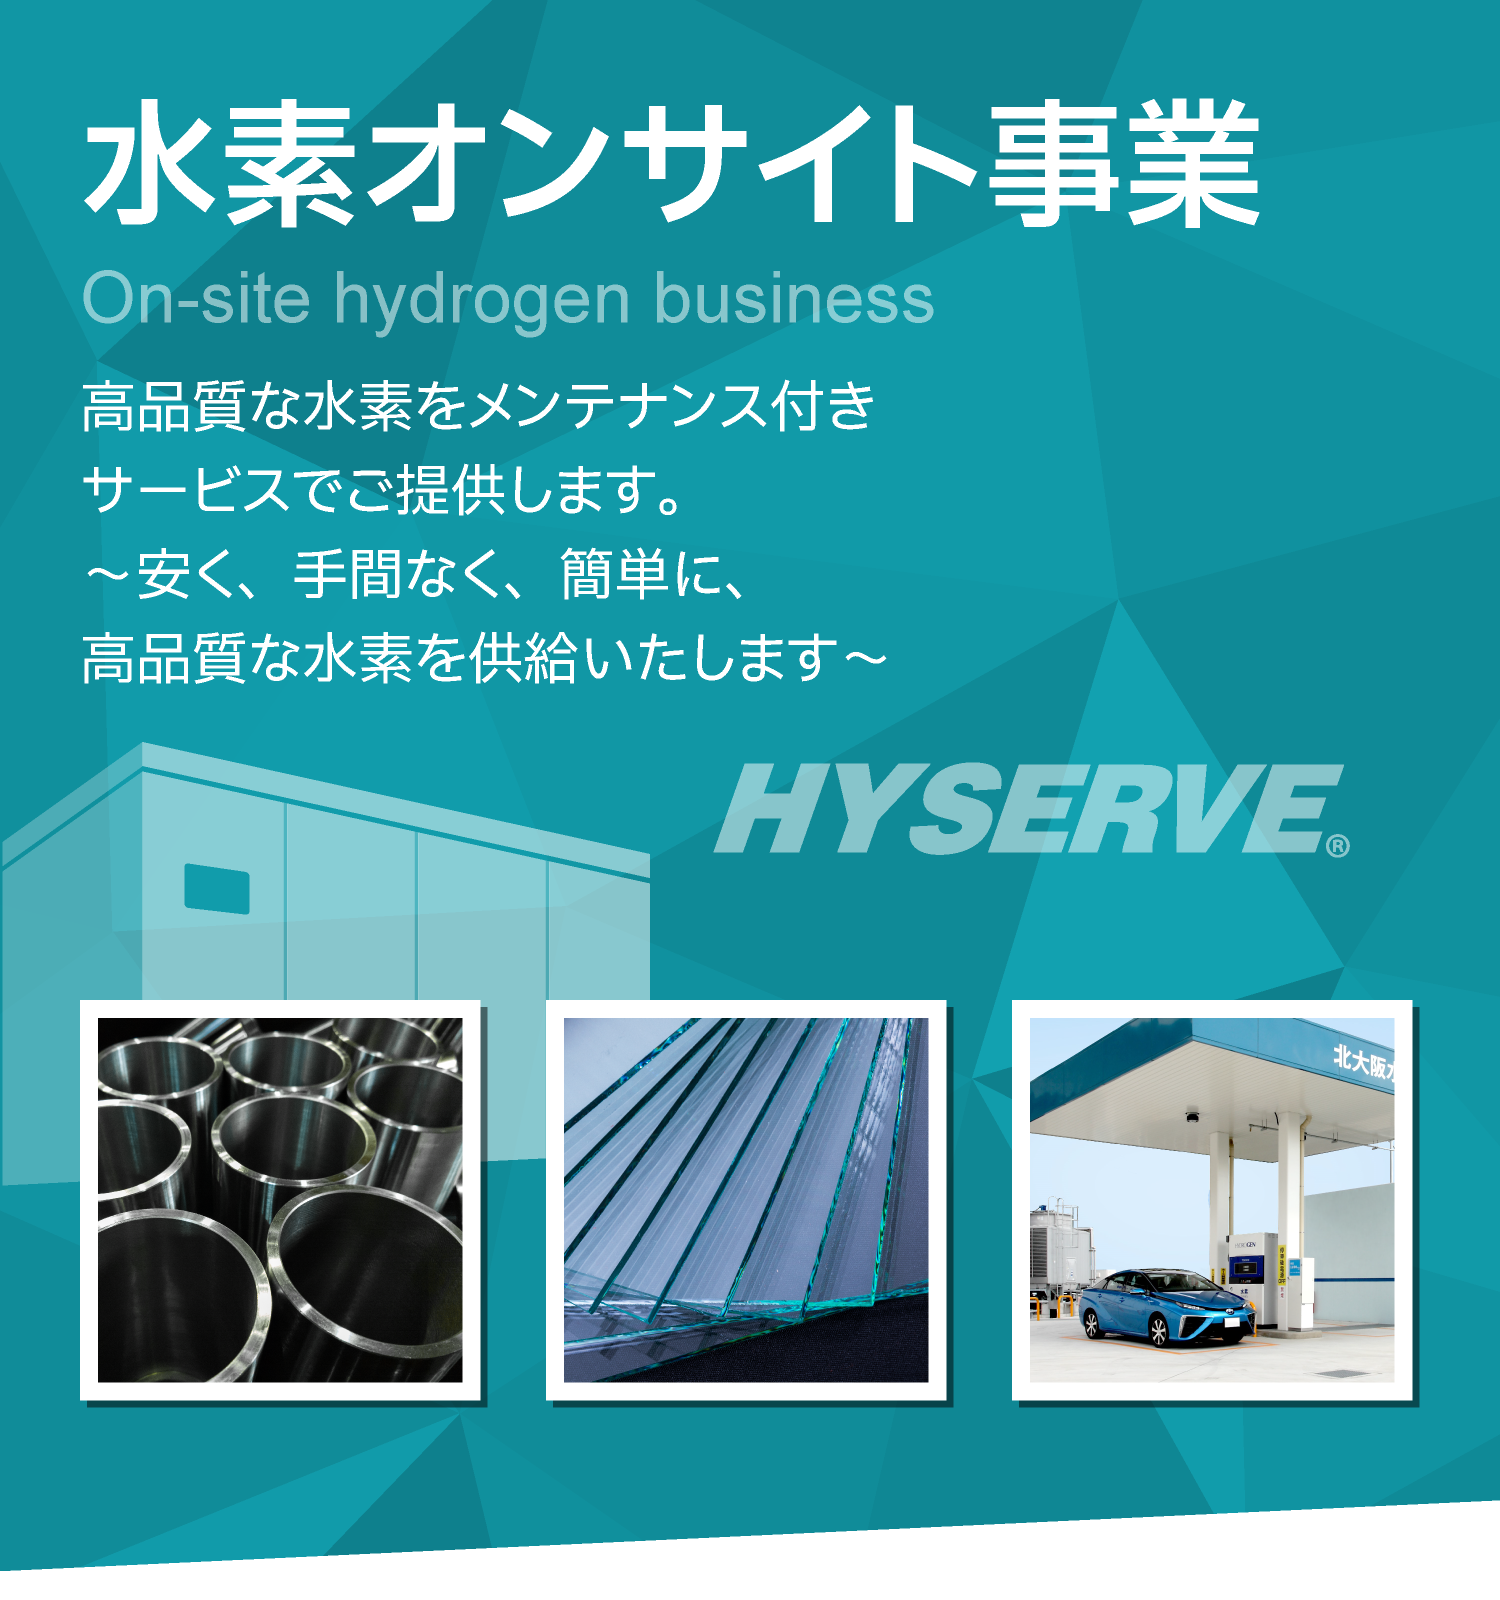 On-site Hydrogen Business: We provide high-quality hydrogen with maintenance service. —We deliver locally produced, easy-to-use and high-quality hydrogen for local consumption.—